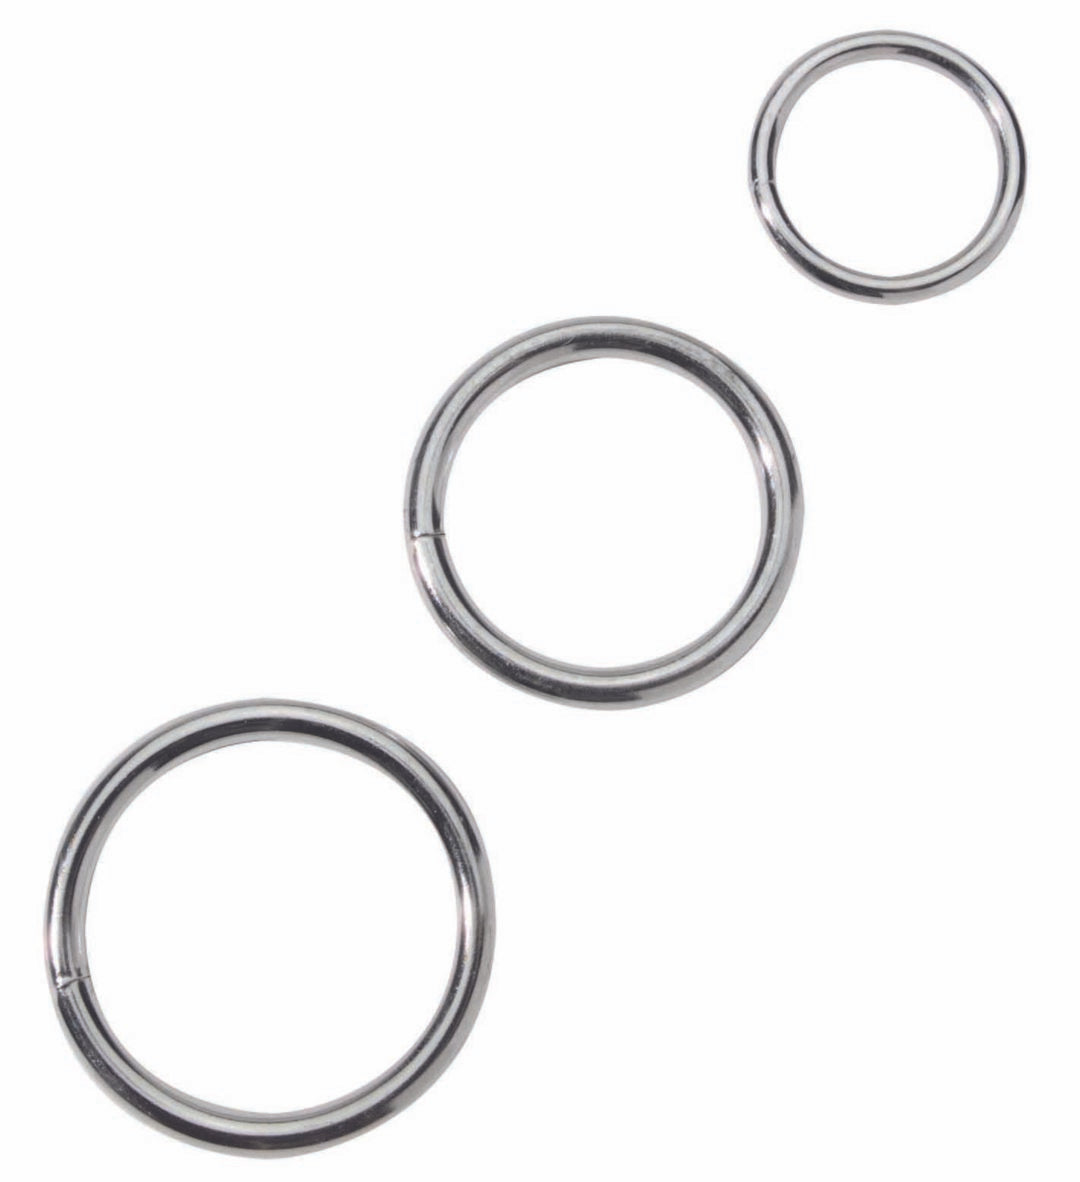 Three metal cock rings in different sizes.